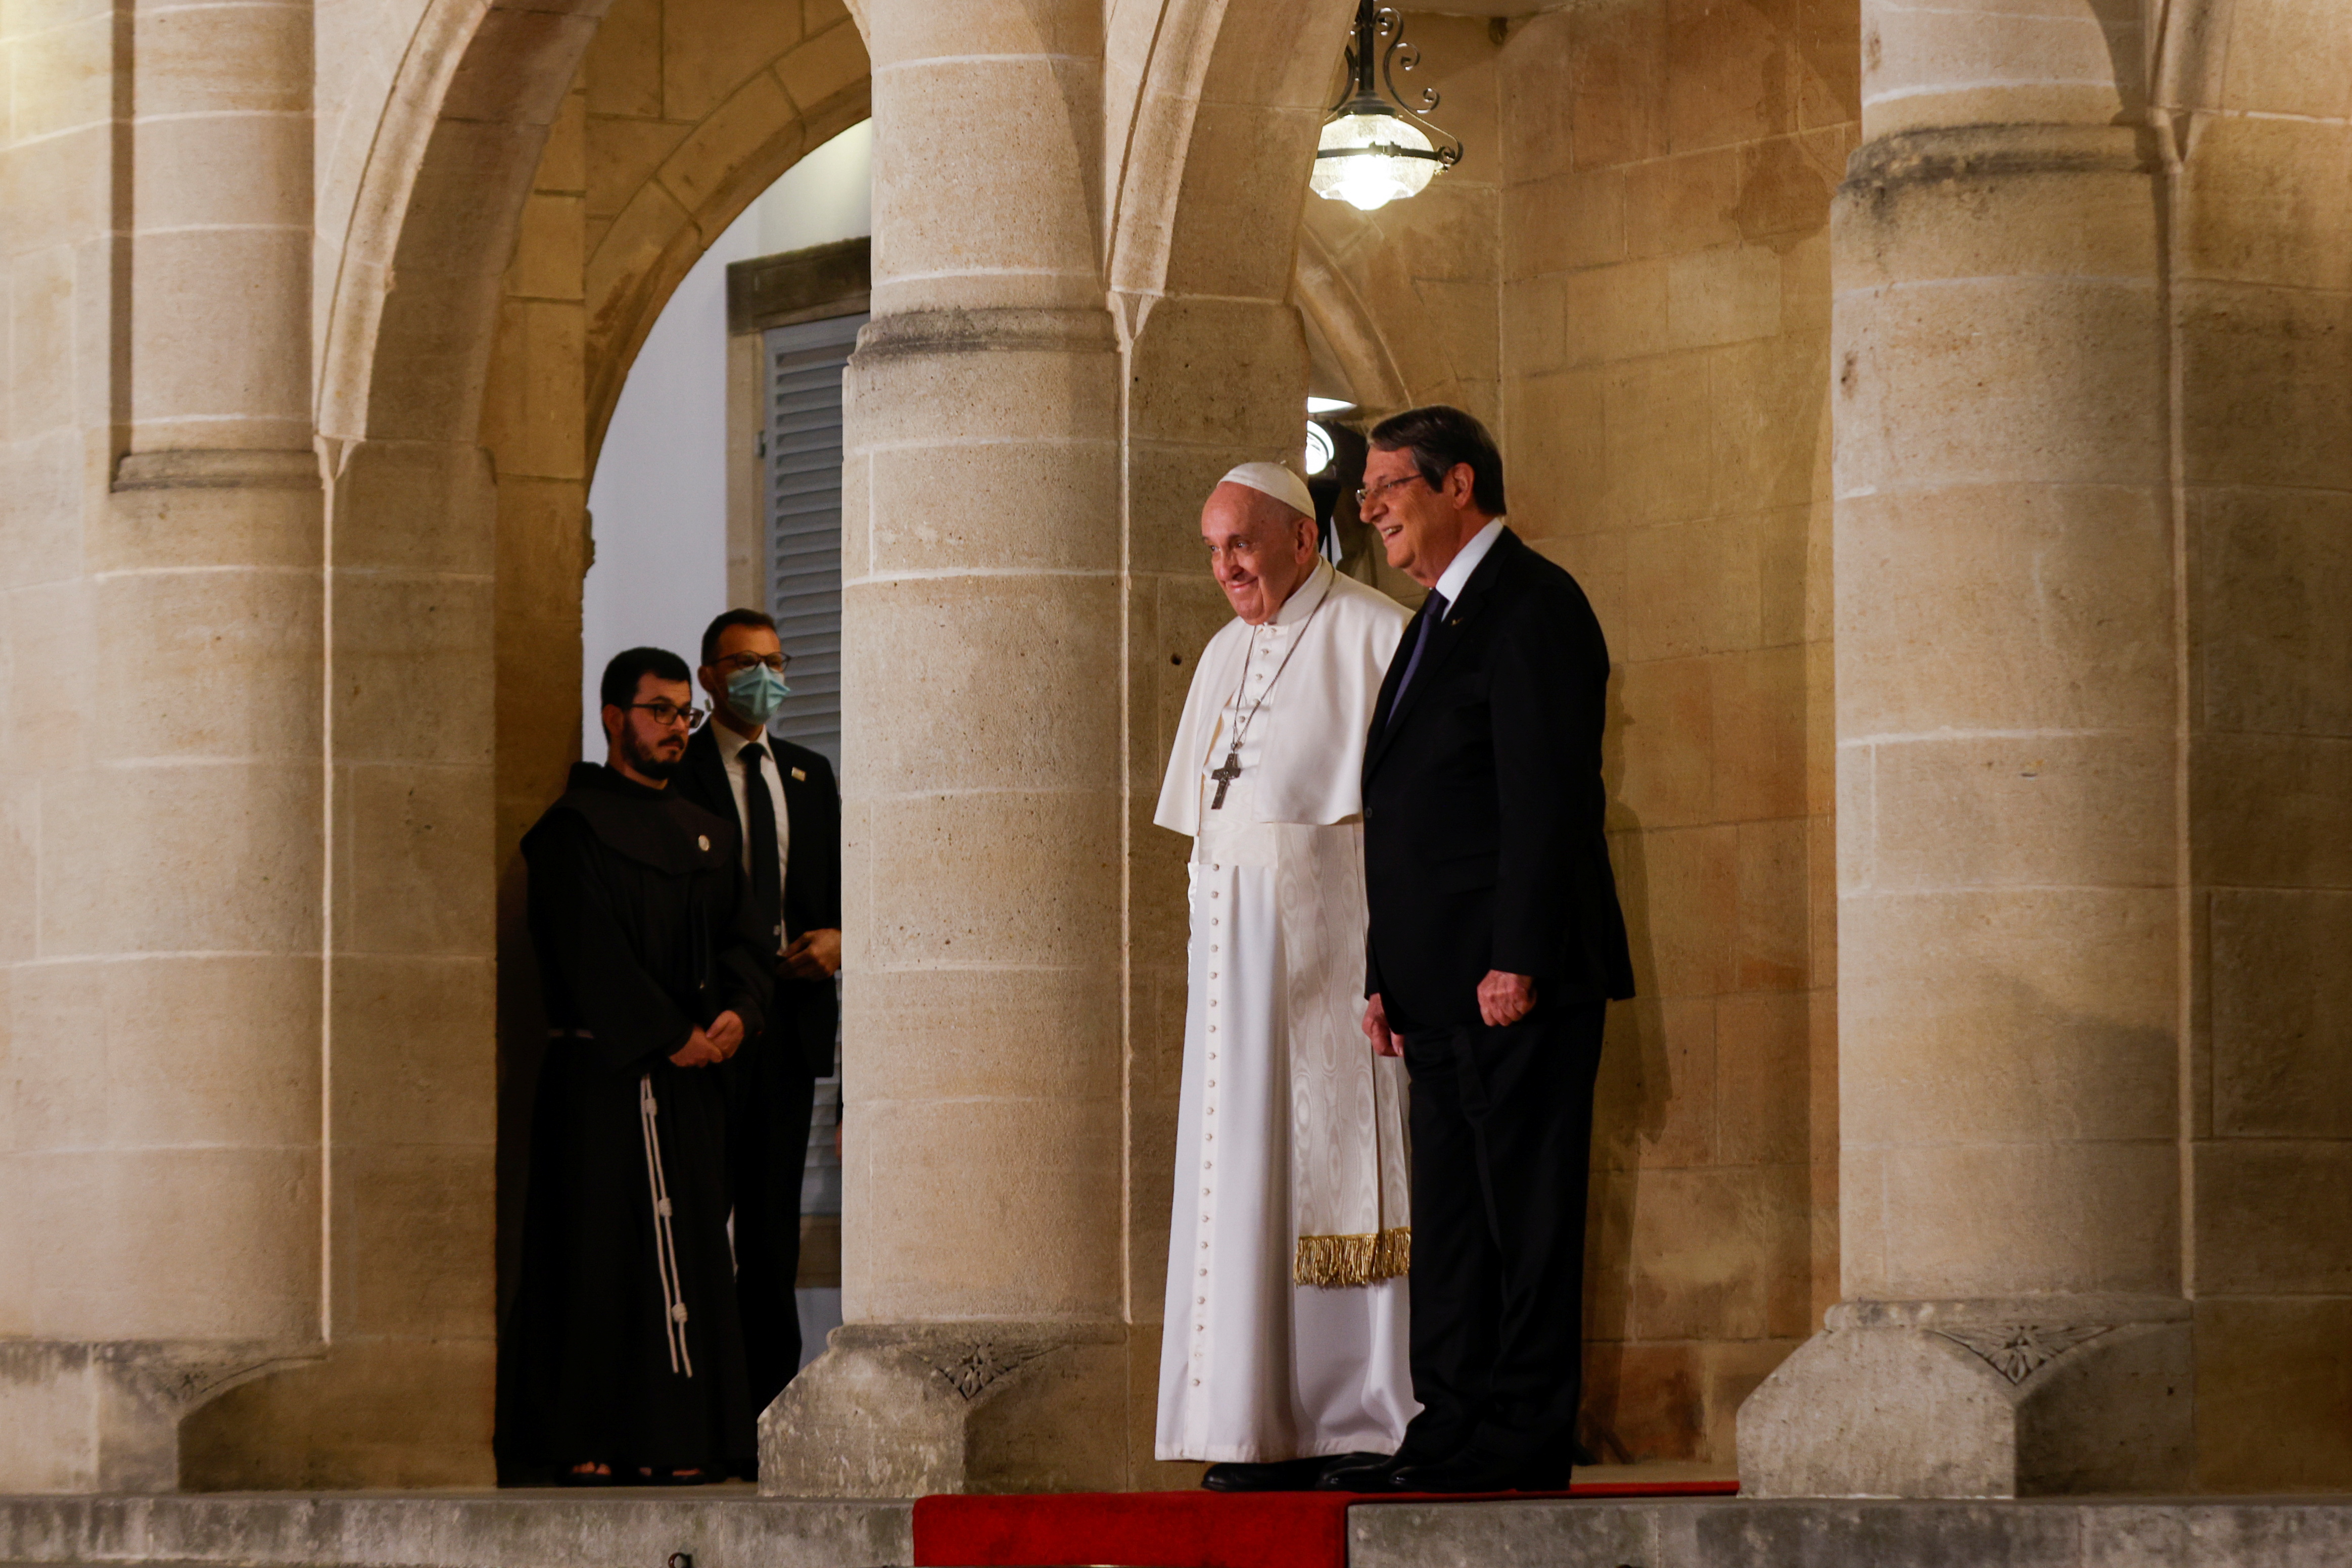 Cypriot President Nicos Anastasiades and Pope Francis stand at the Presidential Palace, in Nicosia, Cyprus, December 2, 2021. REUTERS/Amir Cohen